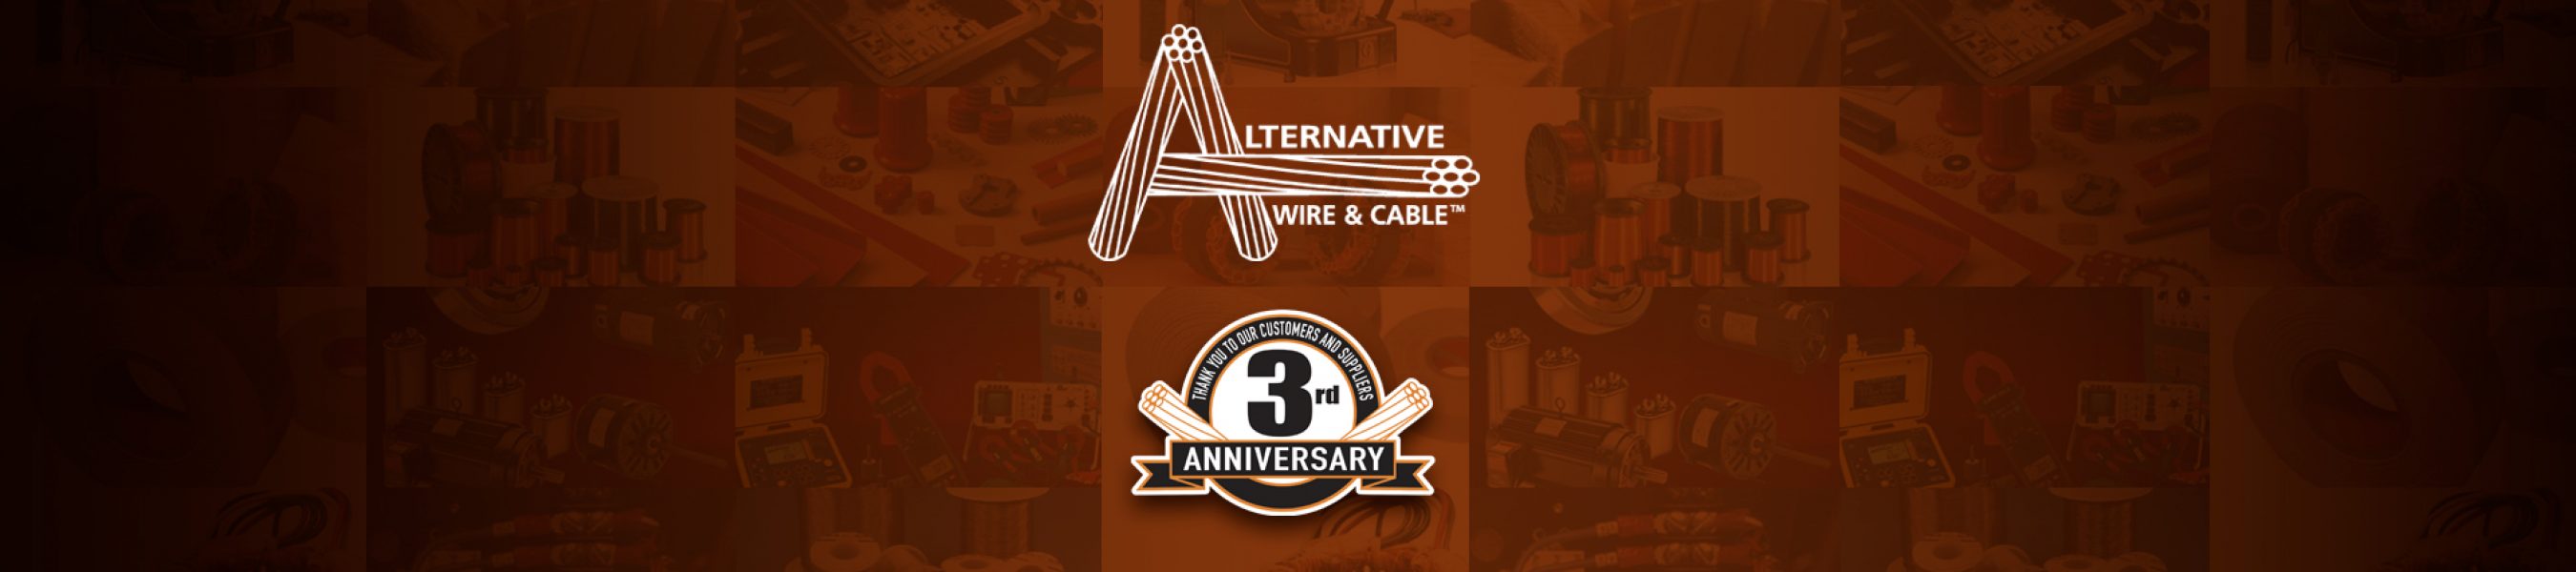 Products-Grid-Copper-color-1920x600-with-Anniversary-logo